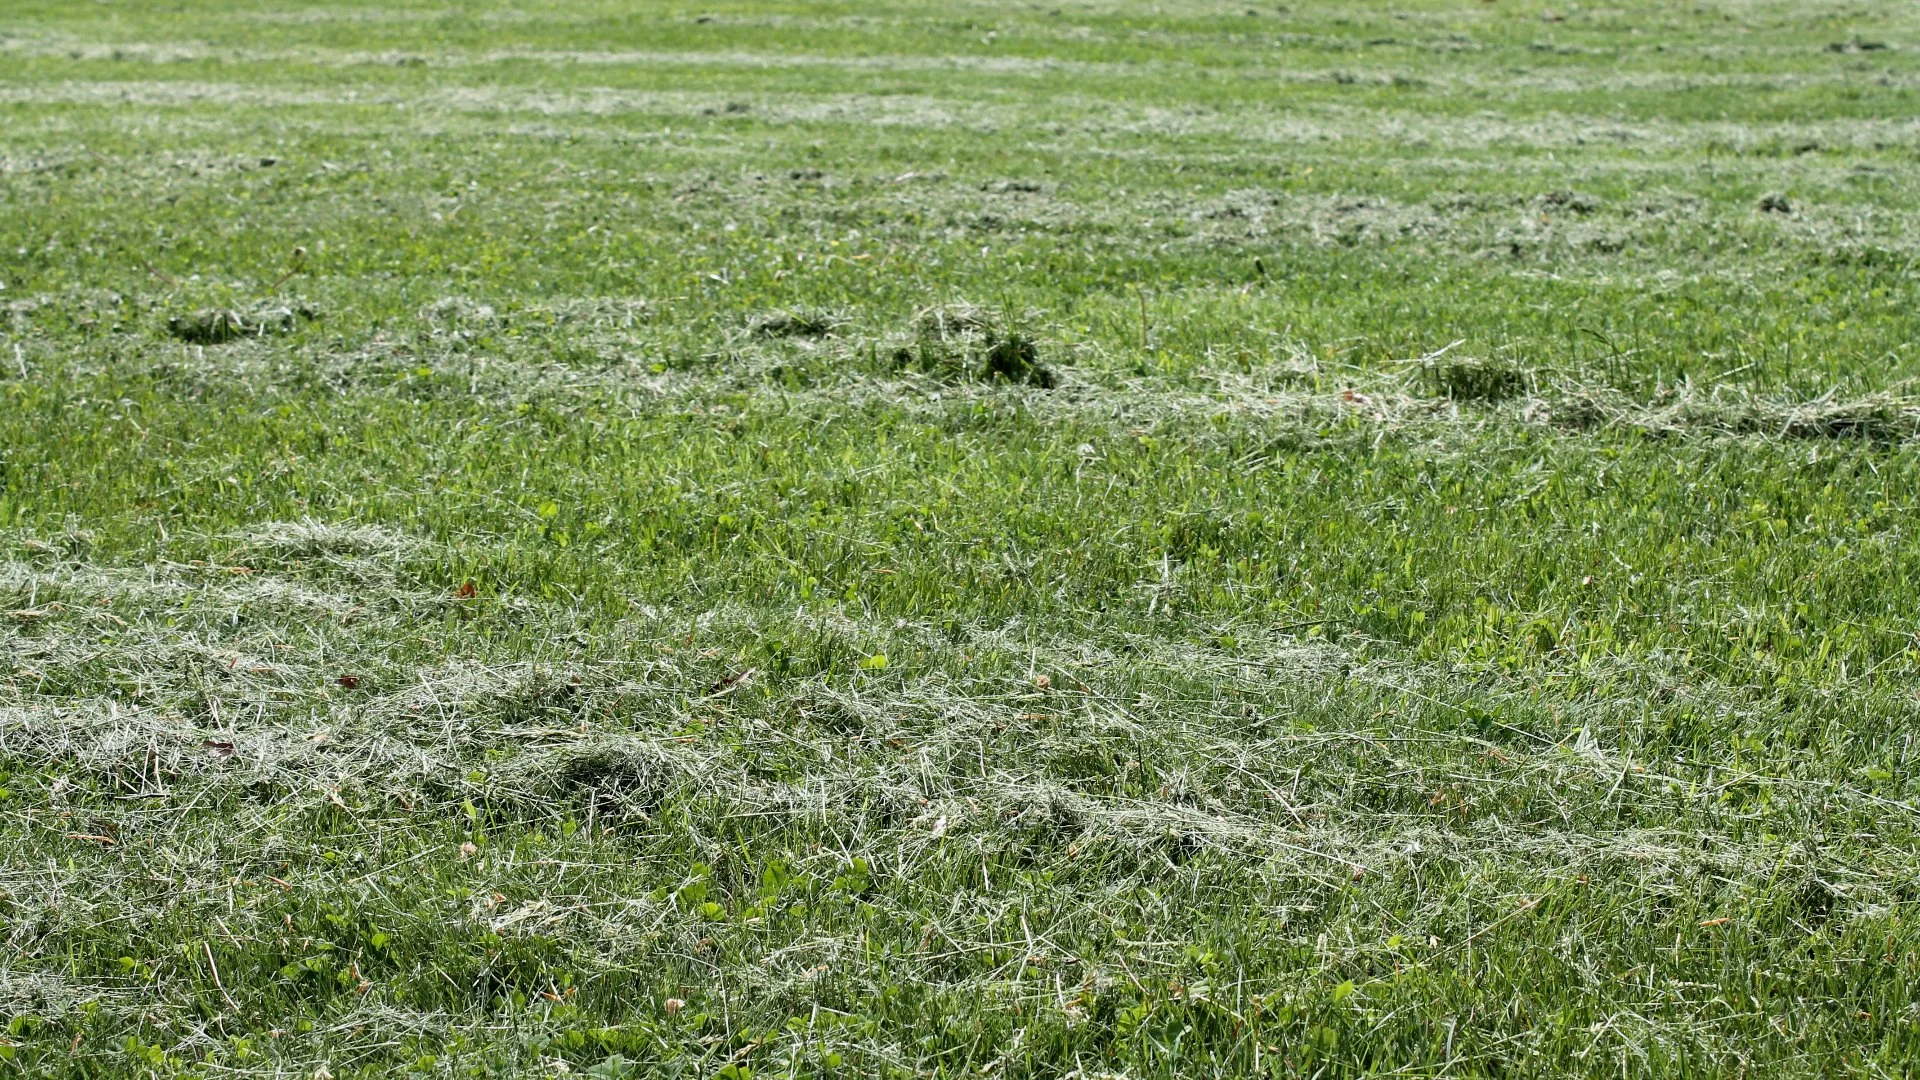 Is It Better to Bag the Grass Clippings After Mowing Your Lawn or Leave Them?